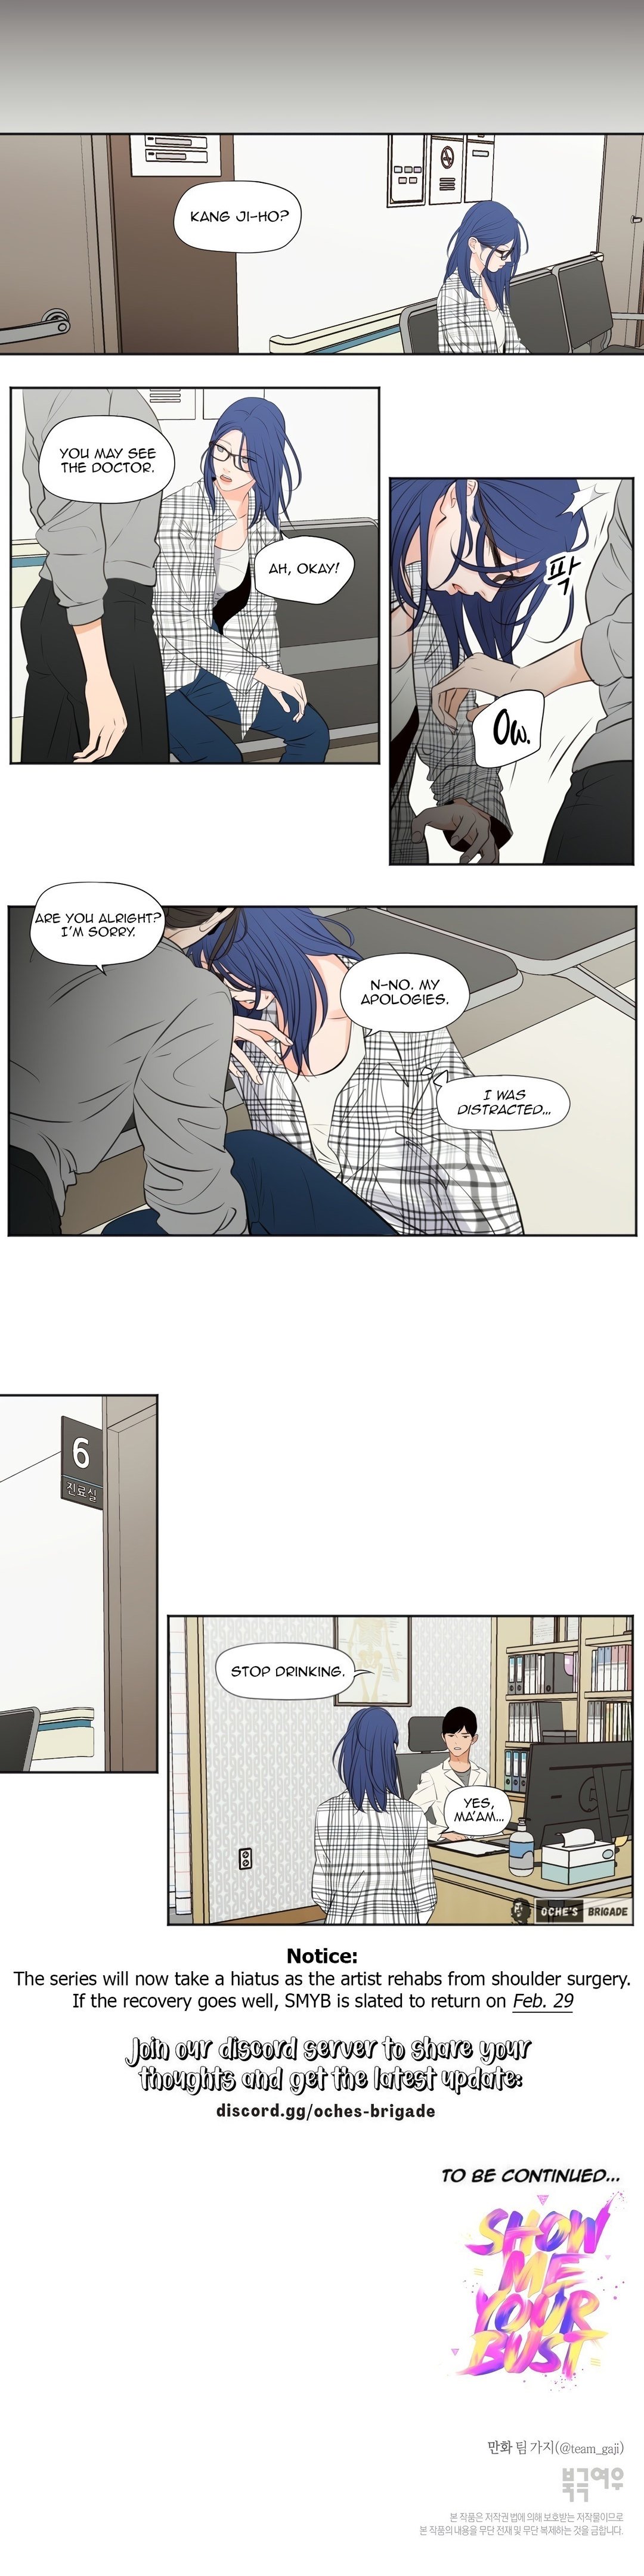 show-me-your-bust-chap-41-6